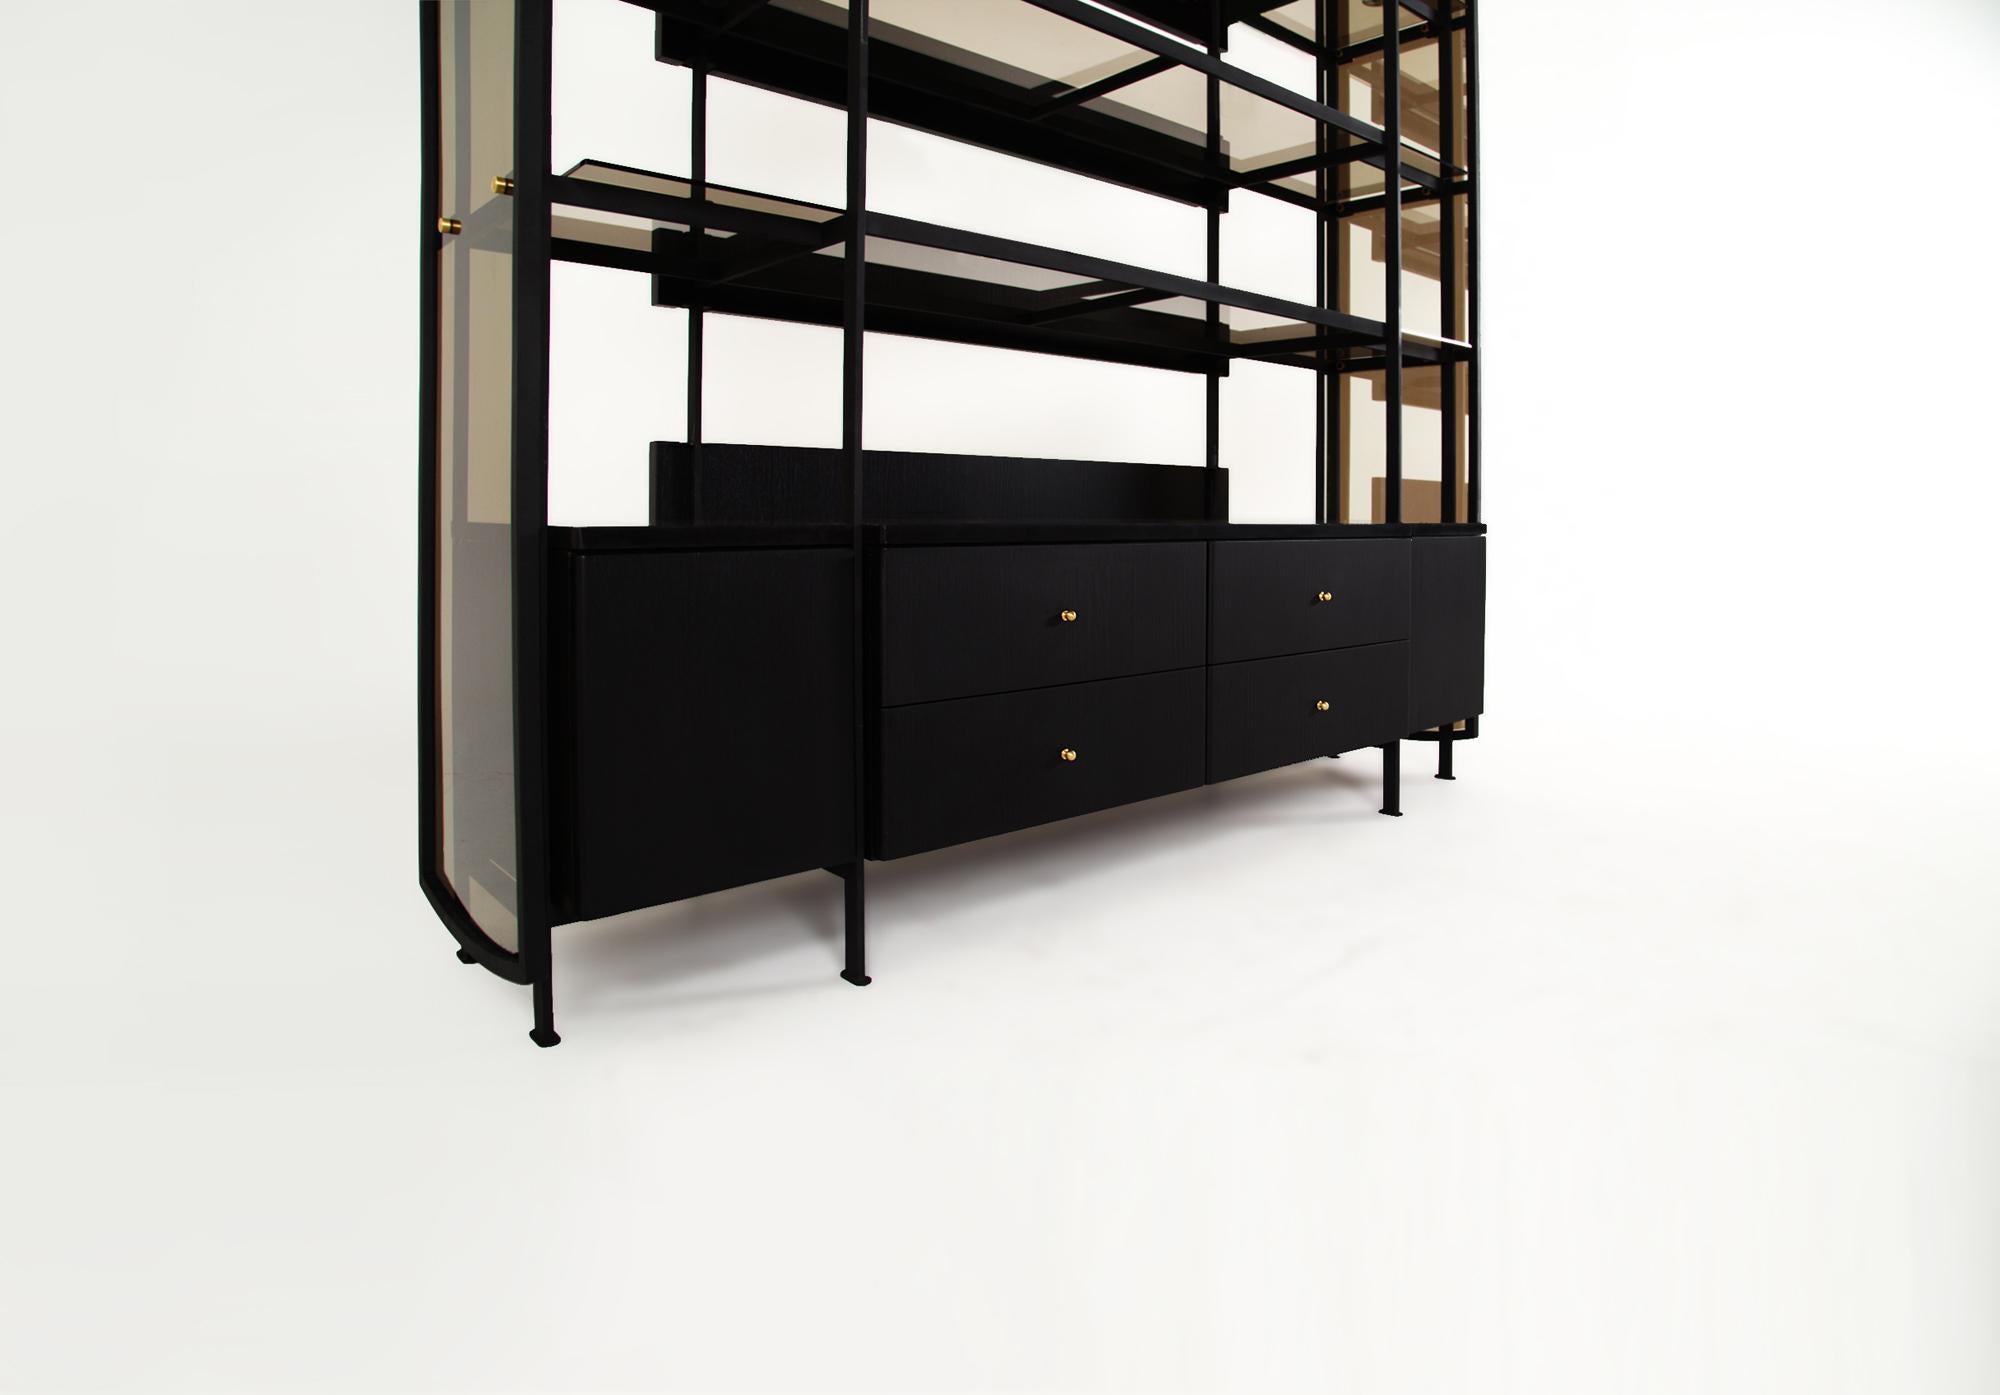 The Collector's cabinet is constructed in blackened steel combined with a blackened oak cabinet fitted to its interior. The cabinet is weighed down with black marble and is intersected by the cabinets’ frame. One-way reflective bronze glass hugs the